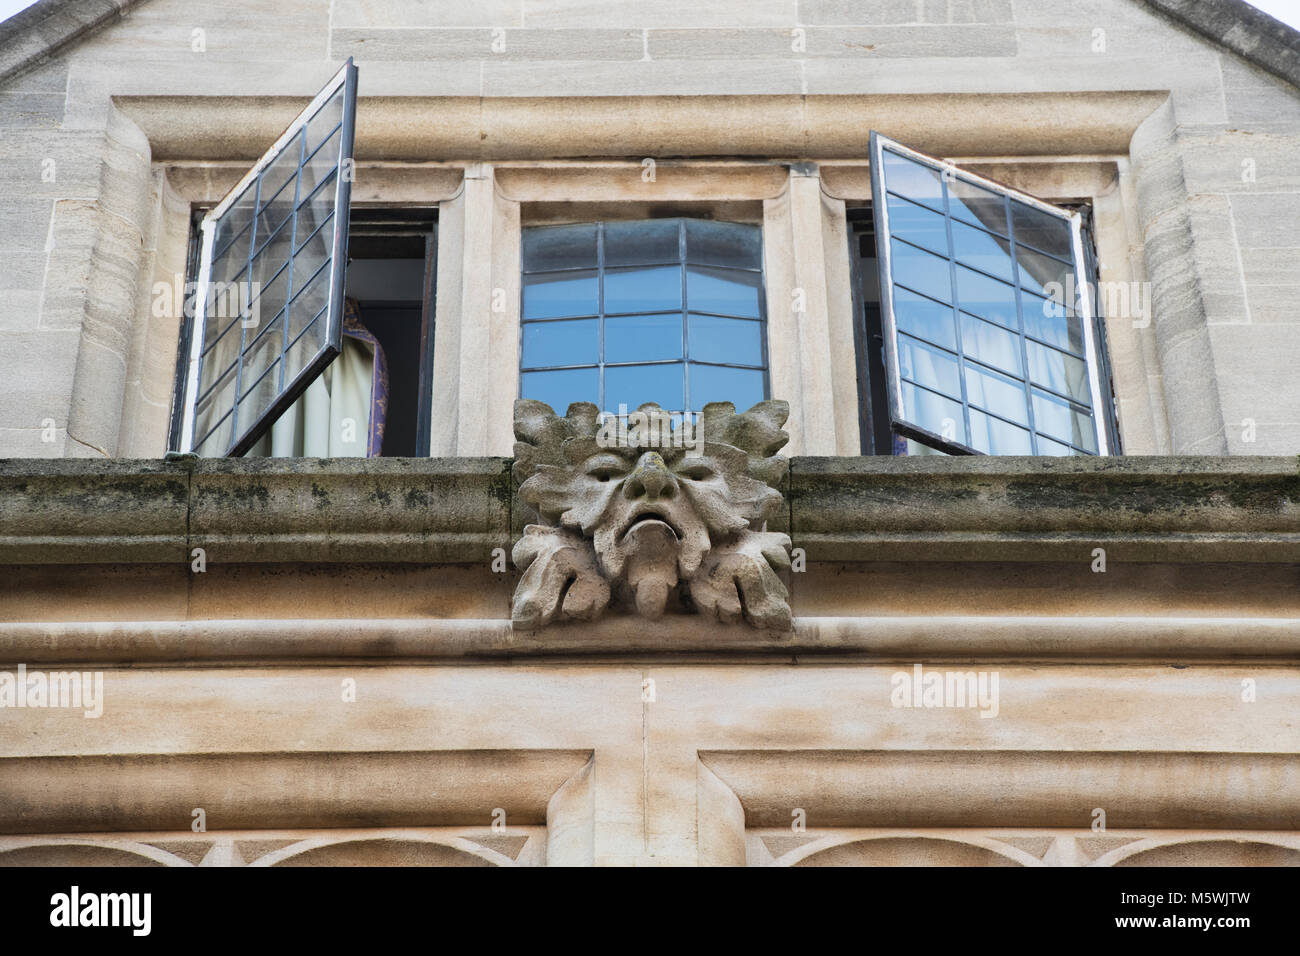 Carved stone gargoyles / grotesques on an oxford university building. Oxford, Oxfordshire, England Stock Photo